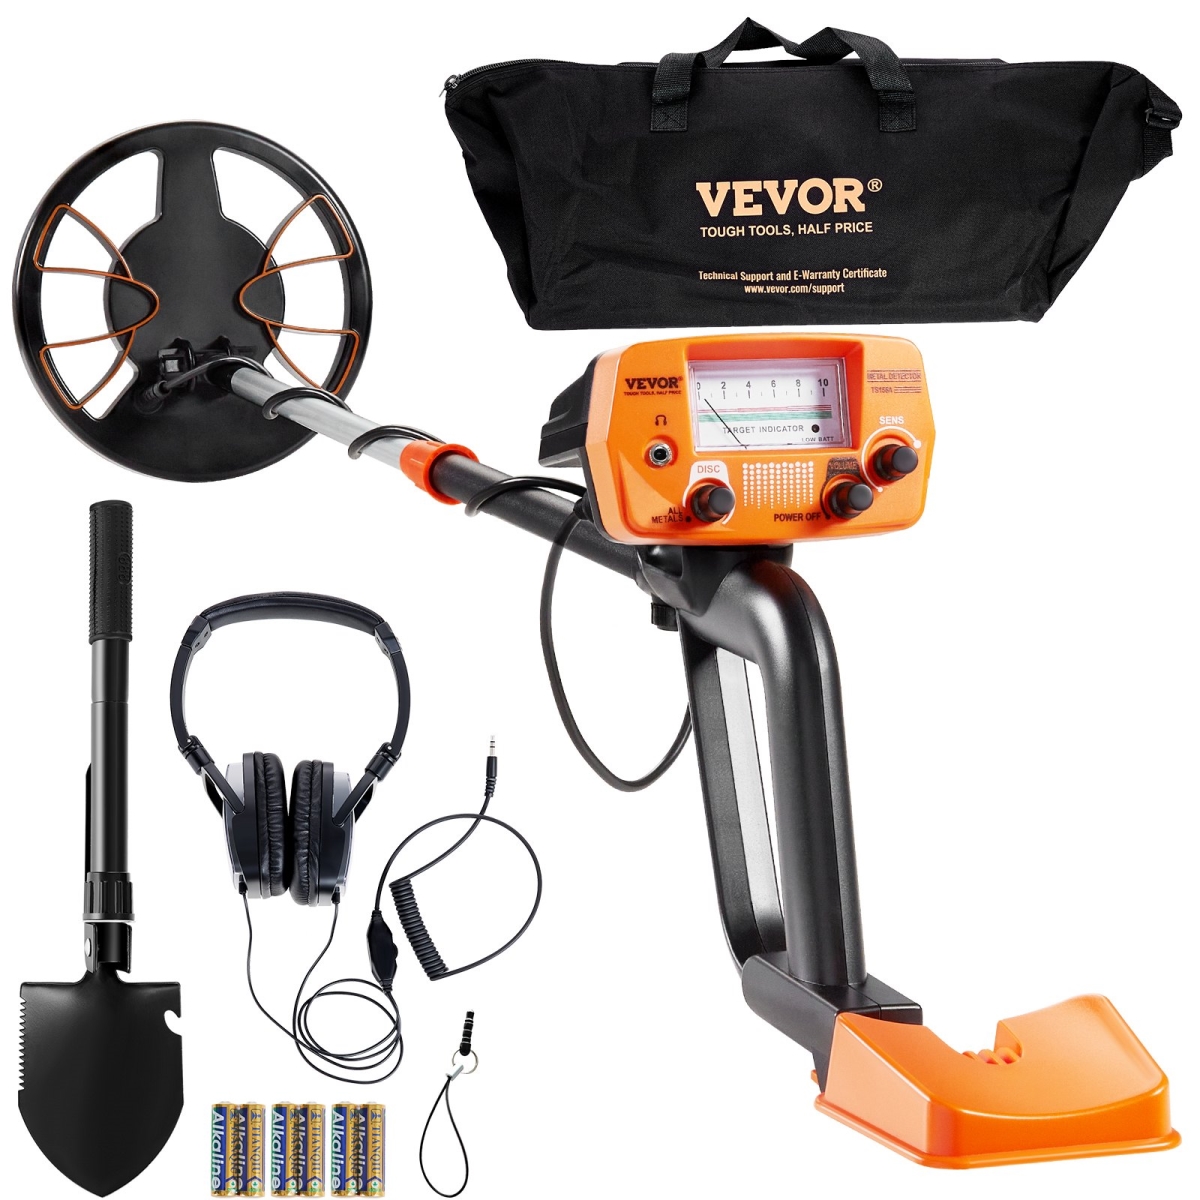 Picture of Vevor ZZSJSTCQY82109C07V0 38-49 in. Metal Detector for Adults & Kids